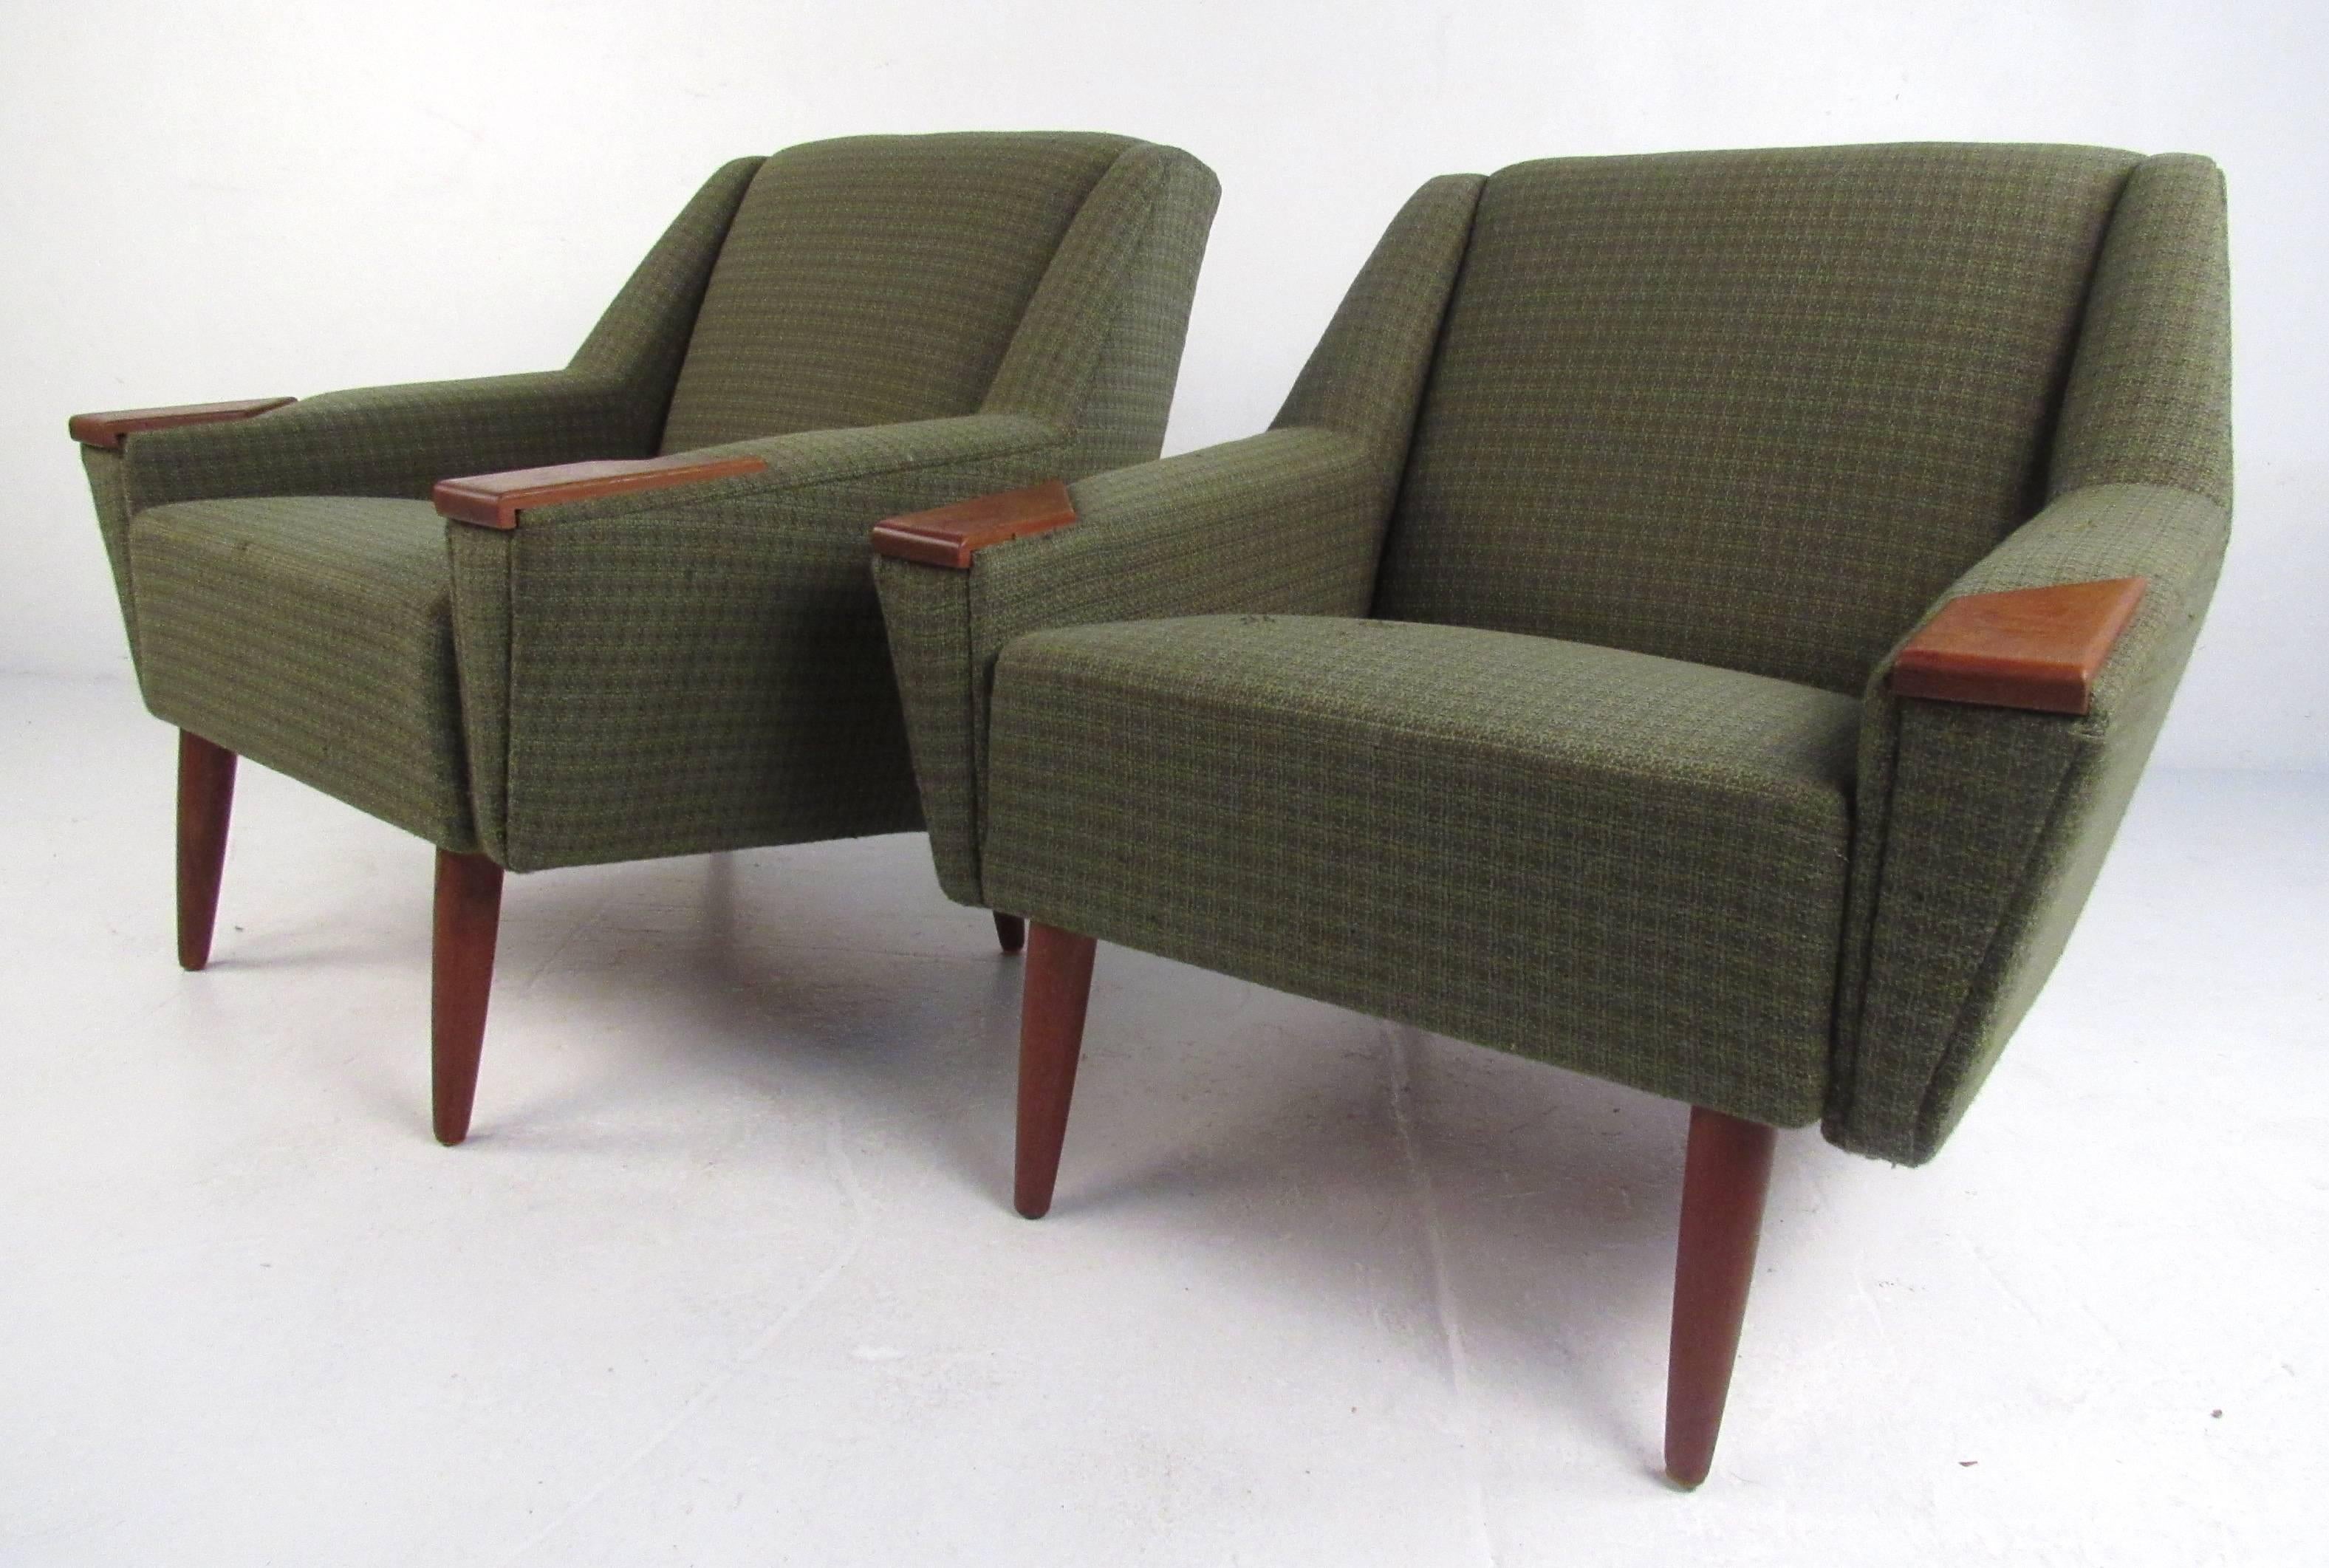 This beautiful pair of vintage modern lounge chairs boast wood tipped arm rests, tapered walnut legs, and a lovely green upholstery. The angled back rest and thick padded seating offer maximum comfort. A sleek and sturdy design that is sure to make